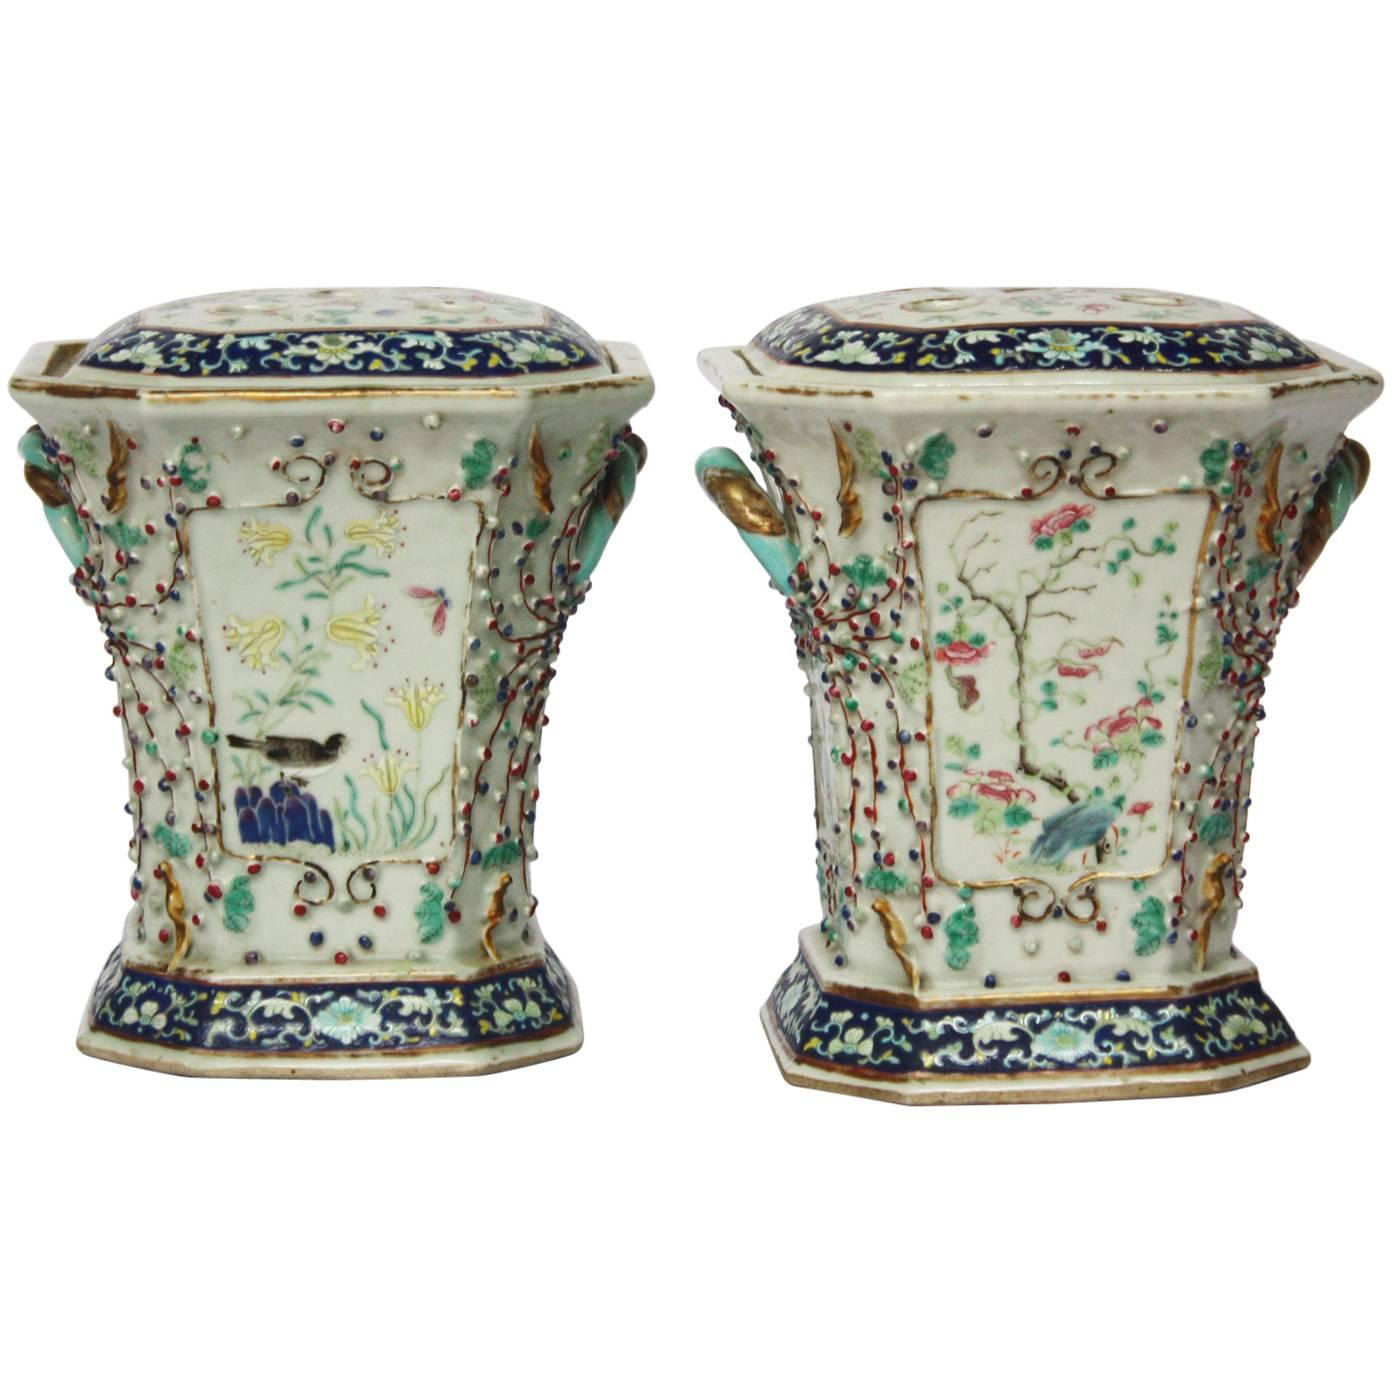 Pair of Chinese Export Bough Pots